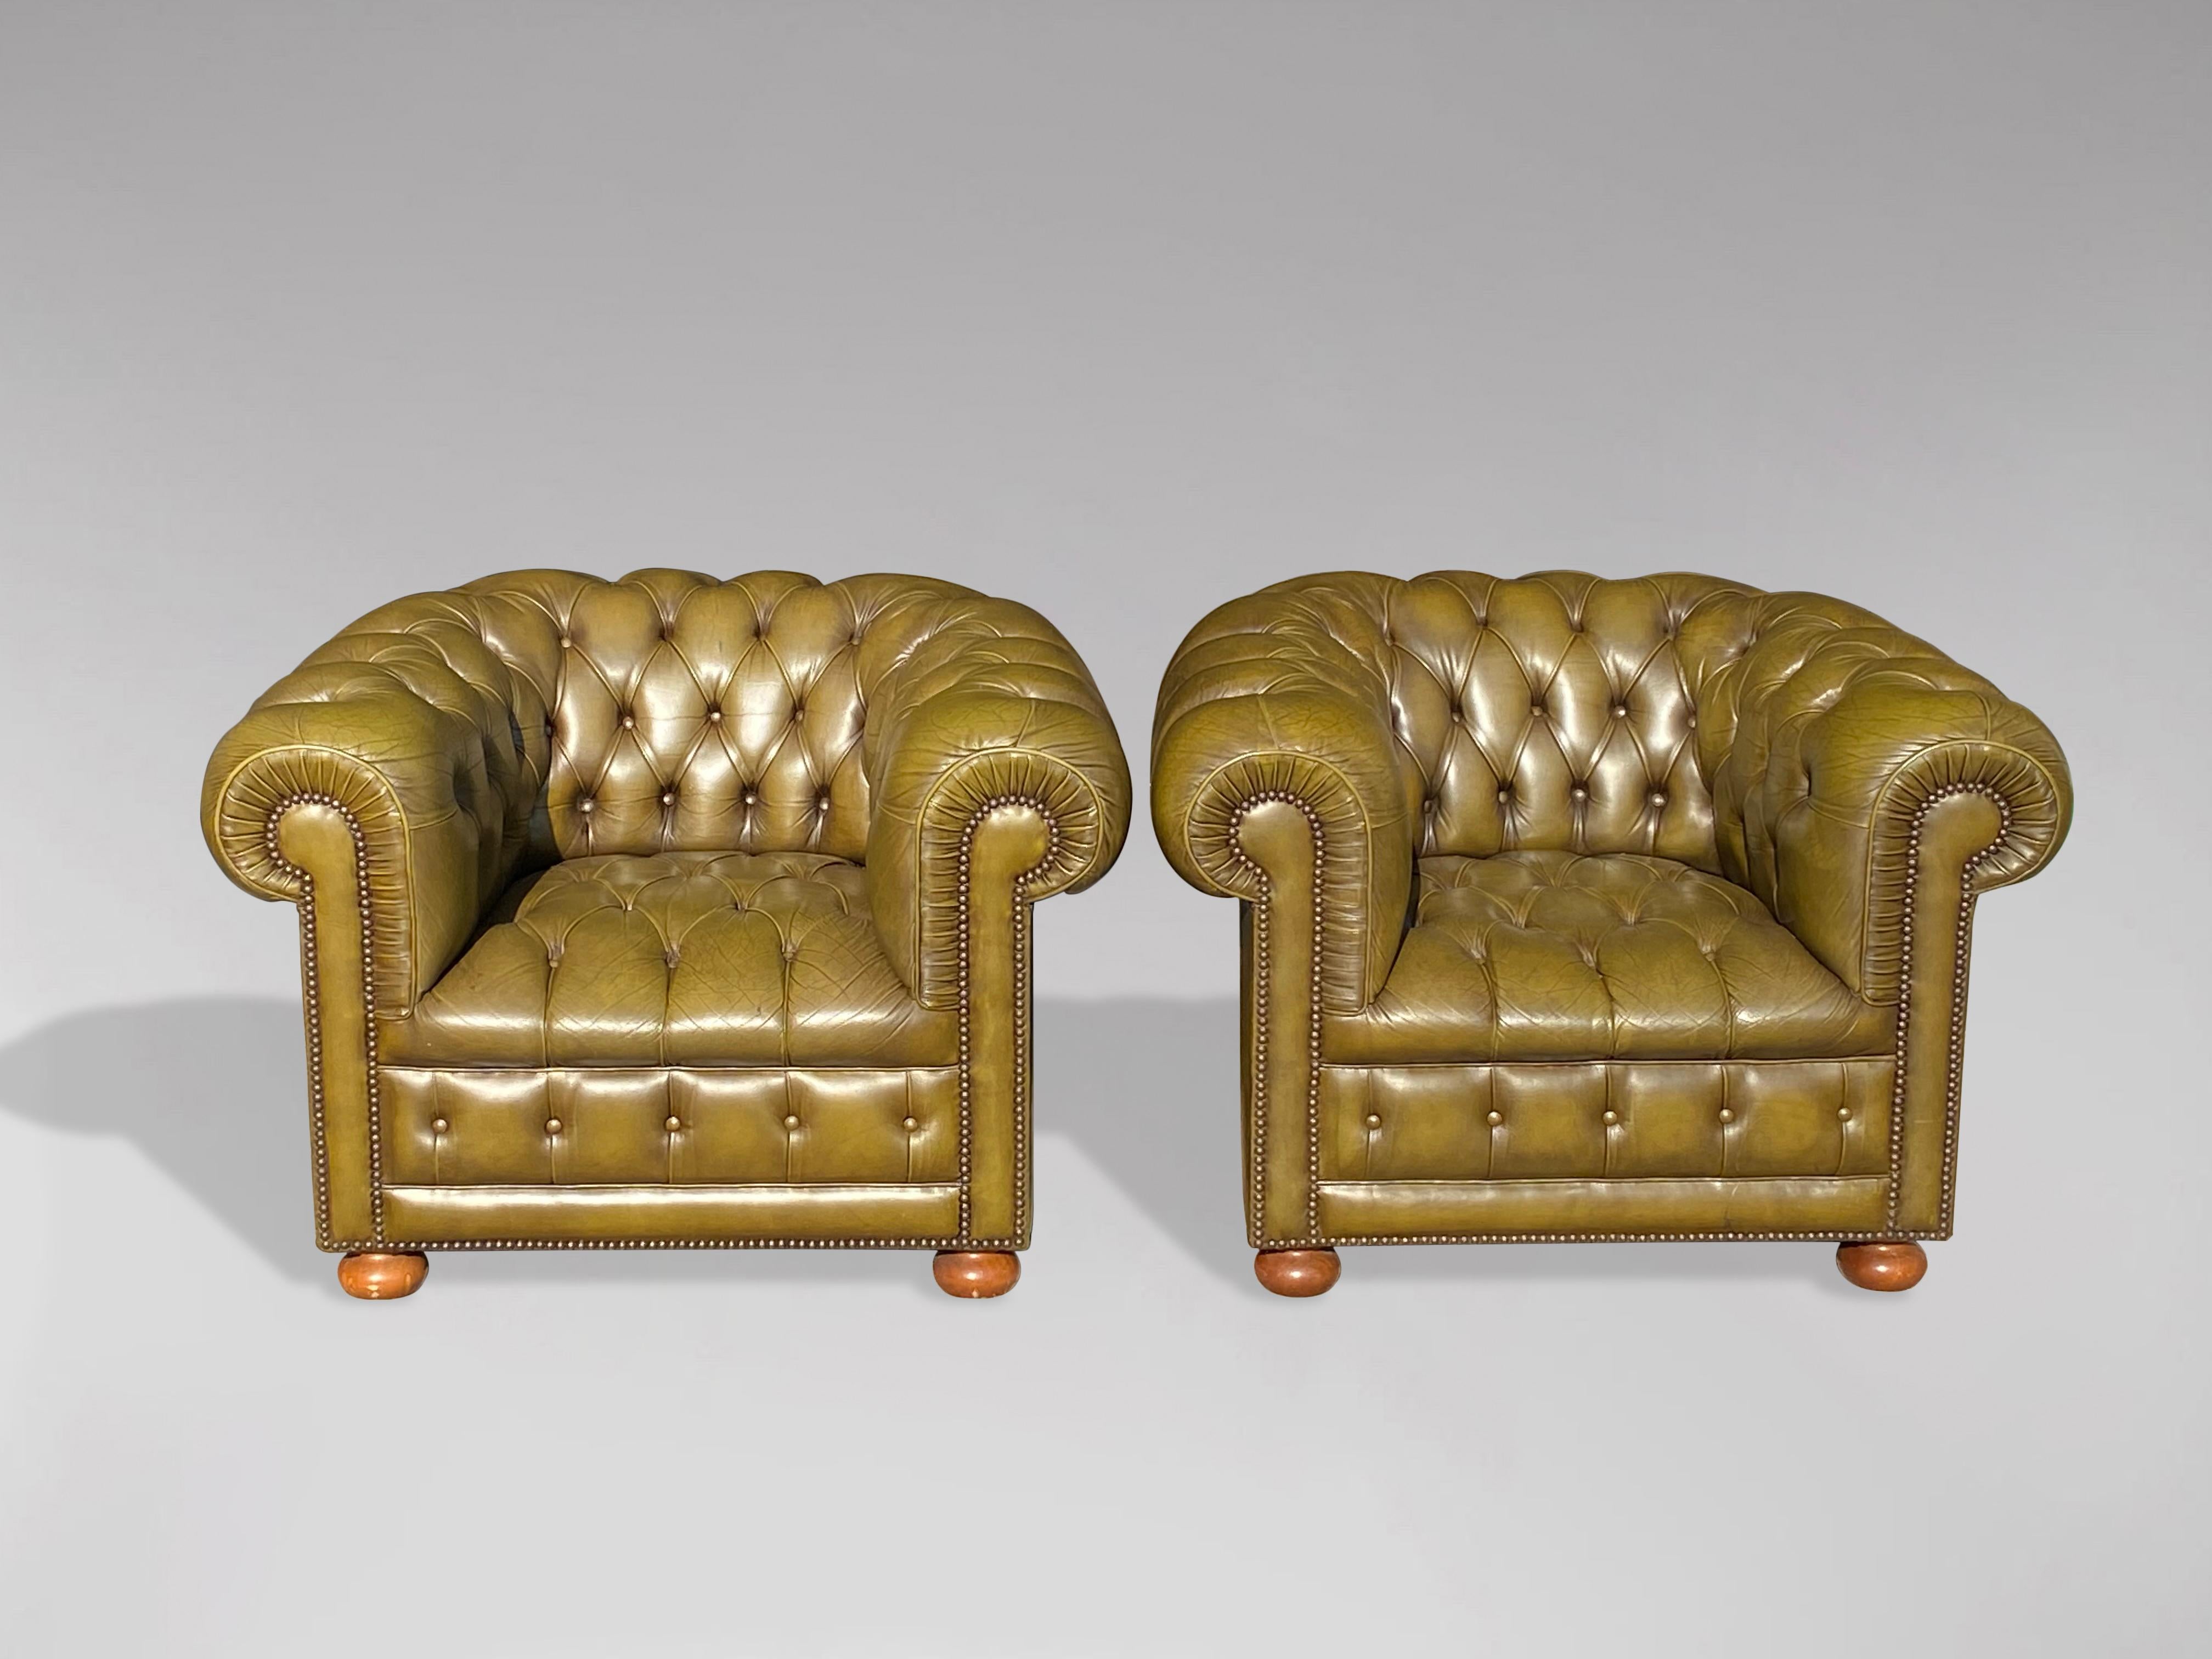 20th Century Three Piece Green Leather Chesterfield Suite In Good Condition For Sale In Petworth,West Sussex, GB